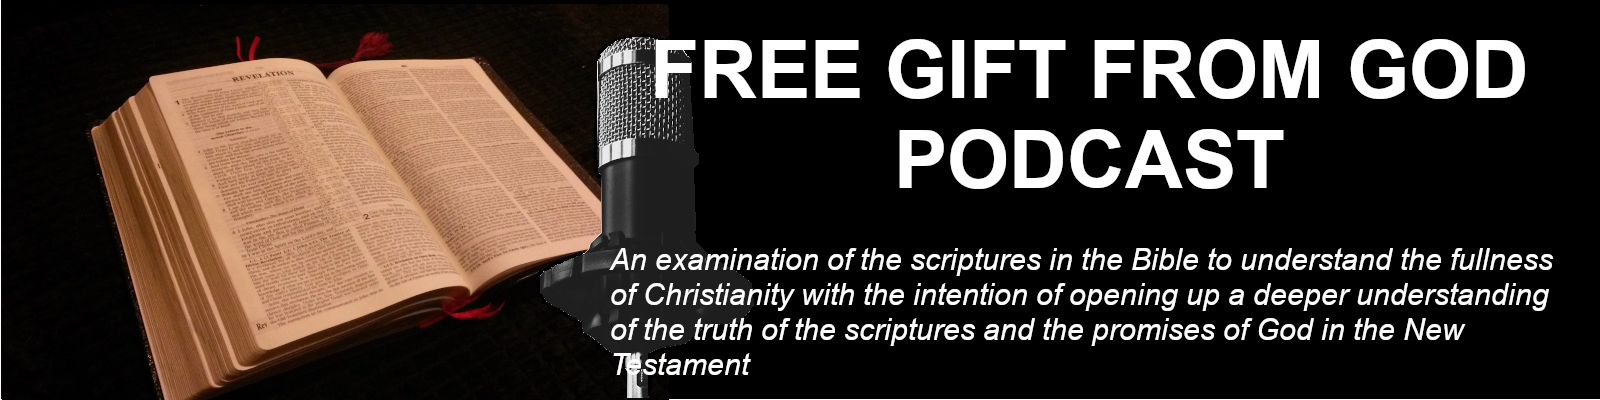 The Free Gift From God Podcast